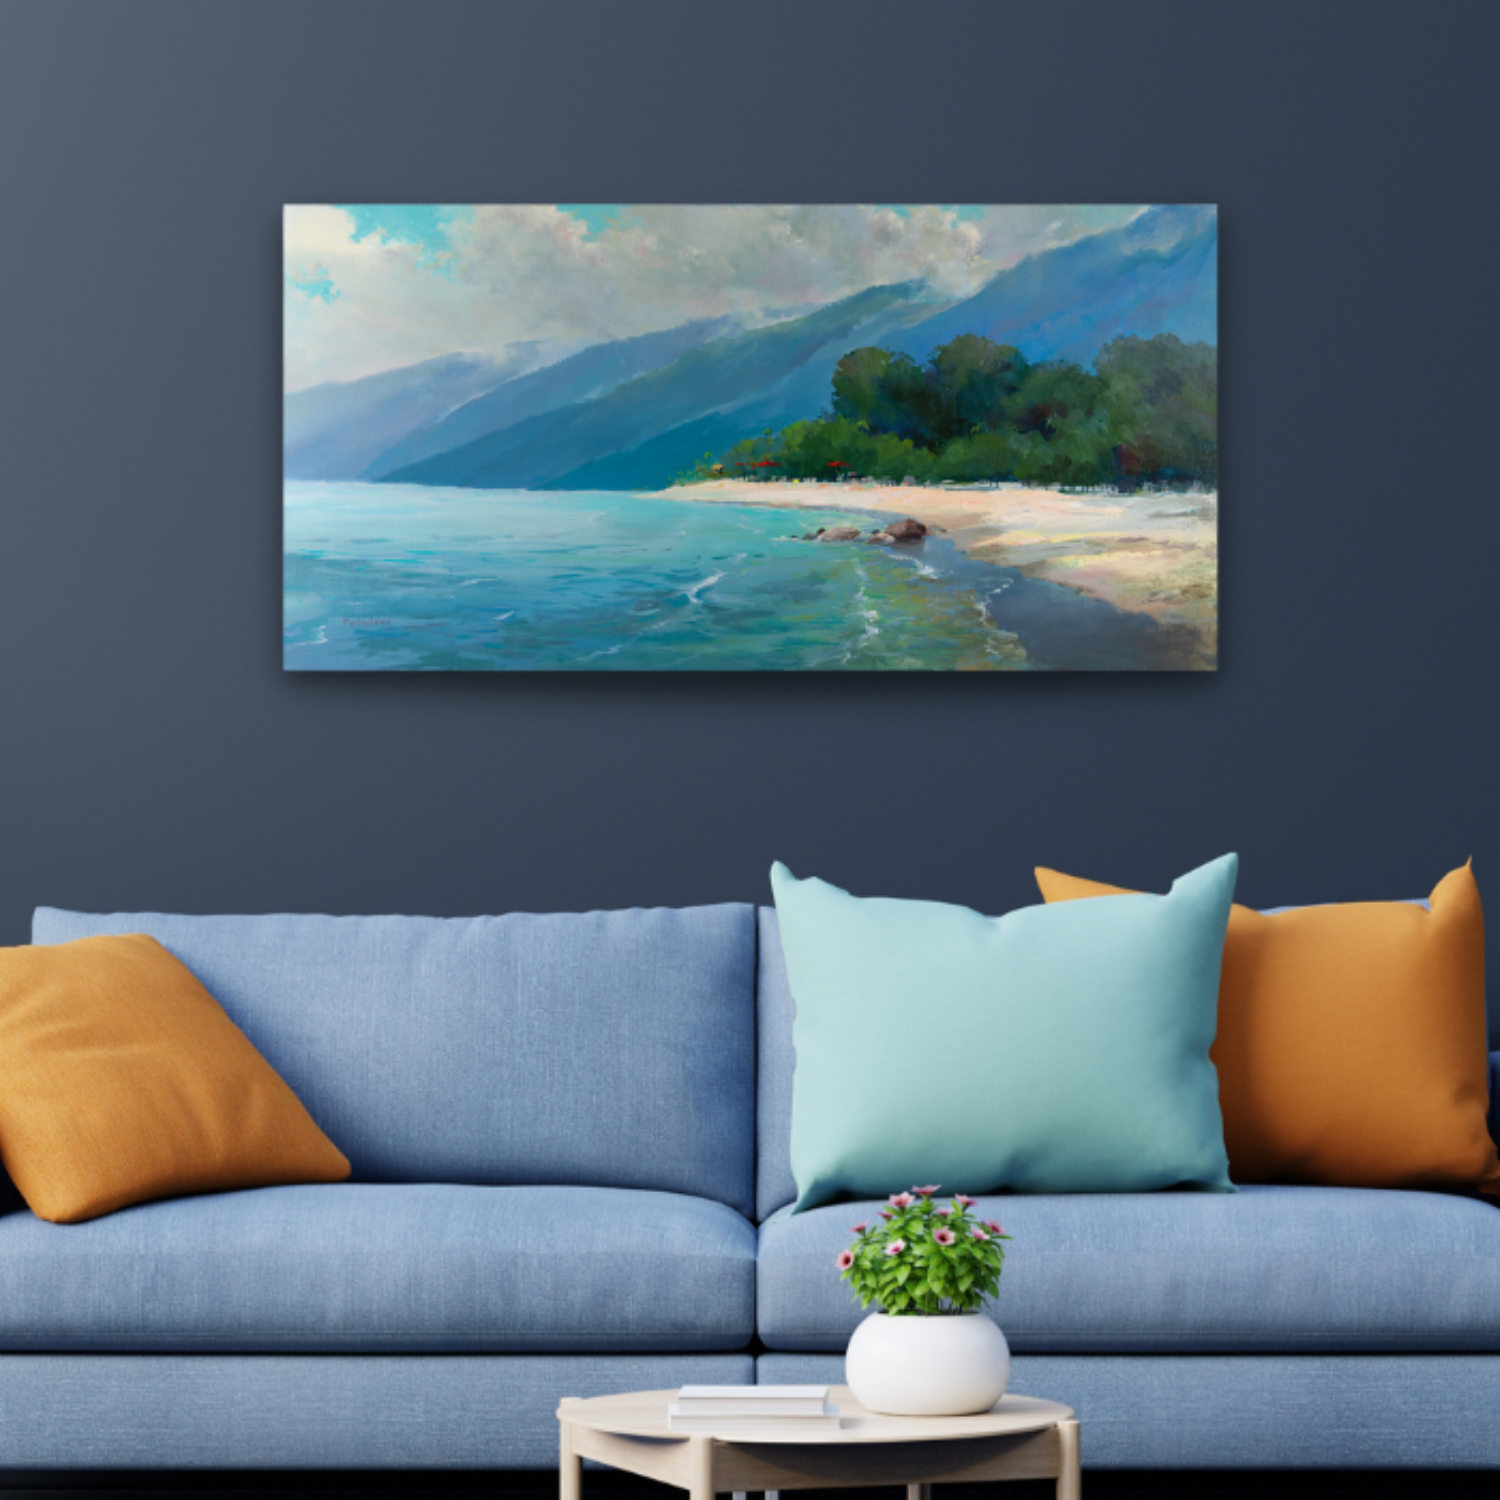 Large canvases are so expensive, but I have a vision of a painting that  must be done large. What alternatives are there to spending a fortune to  buy a really large canvas?